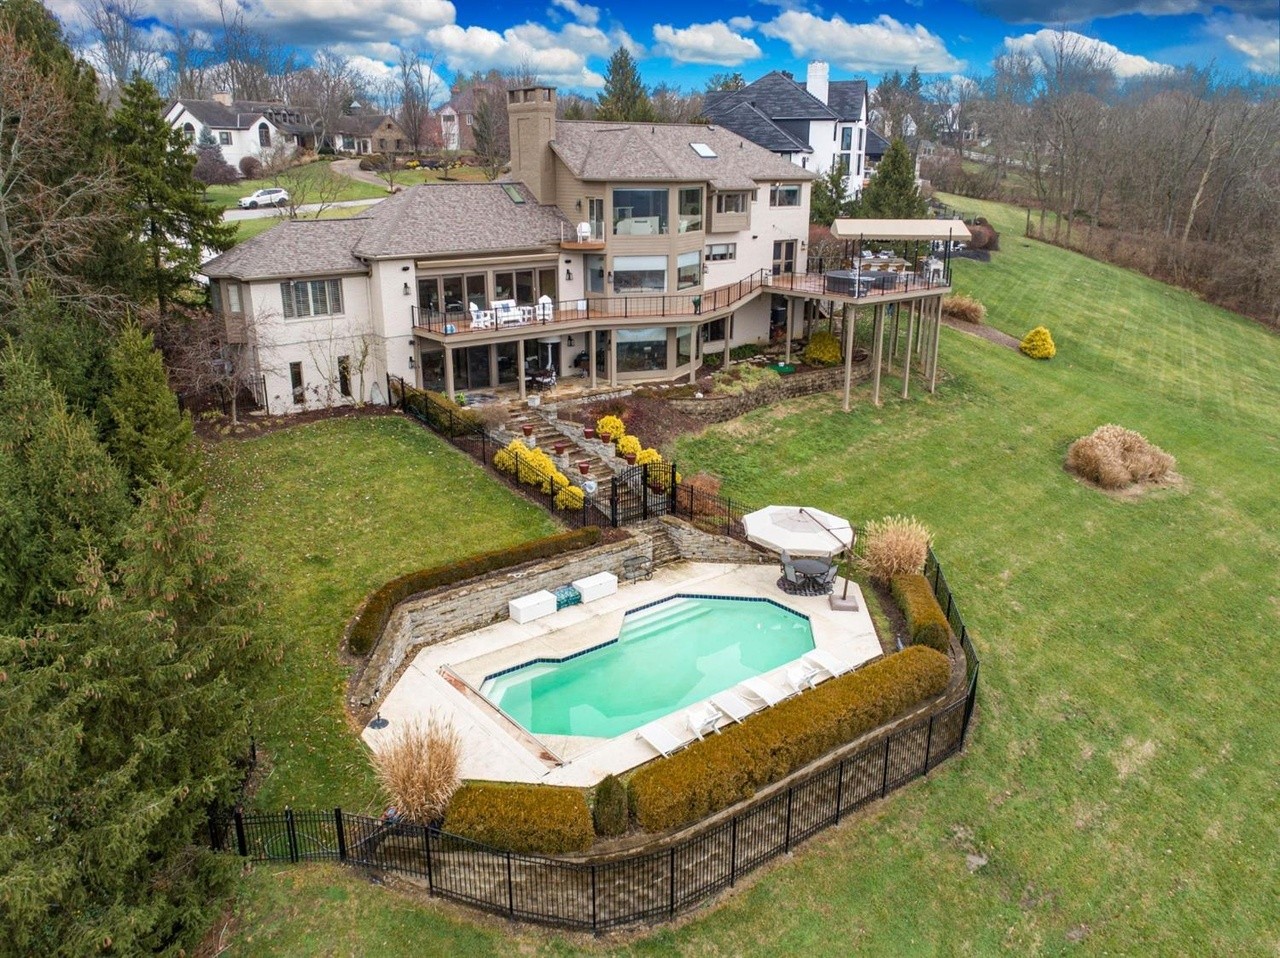 This Anderson Home with Beautiful Views of the Ohio River Is for Sale for $2.1 Million